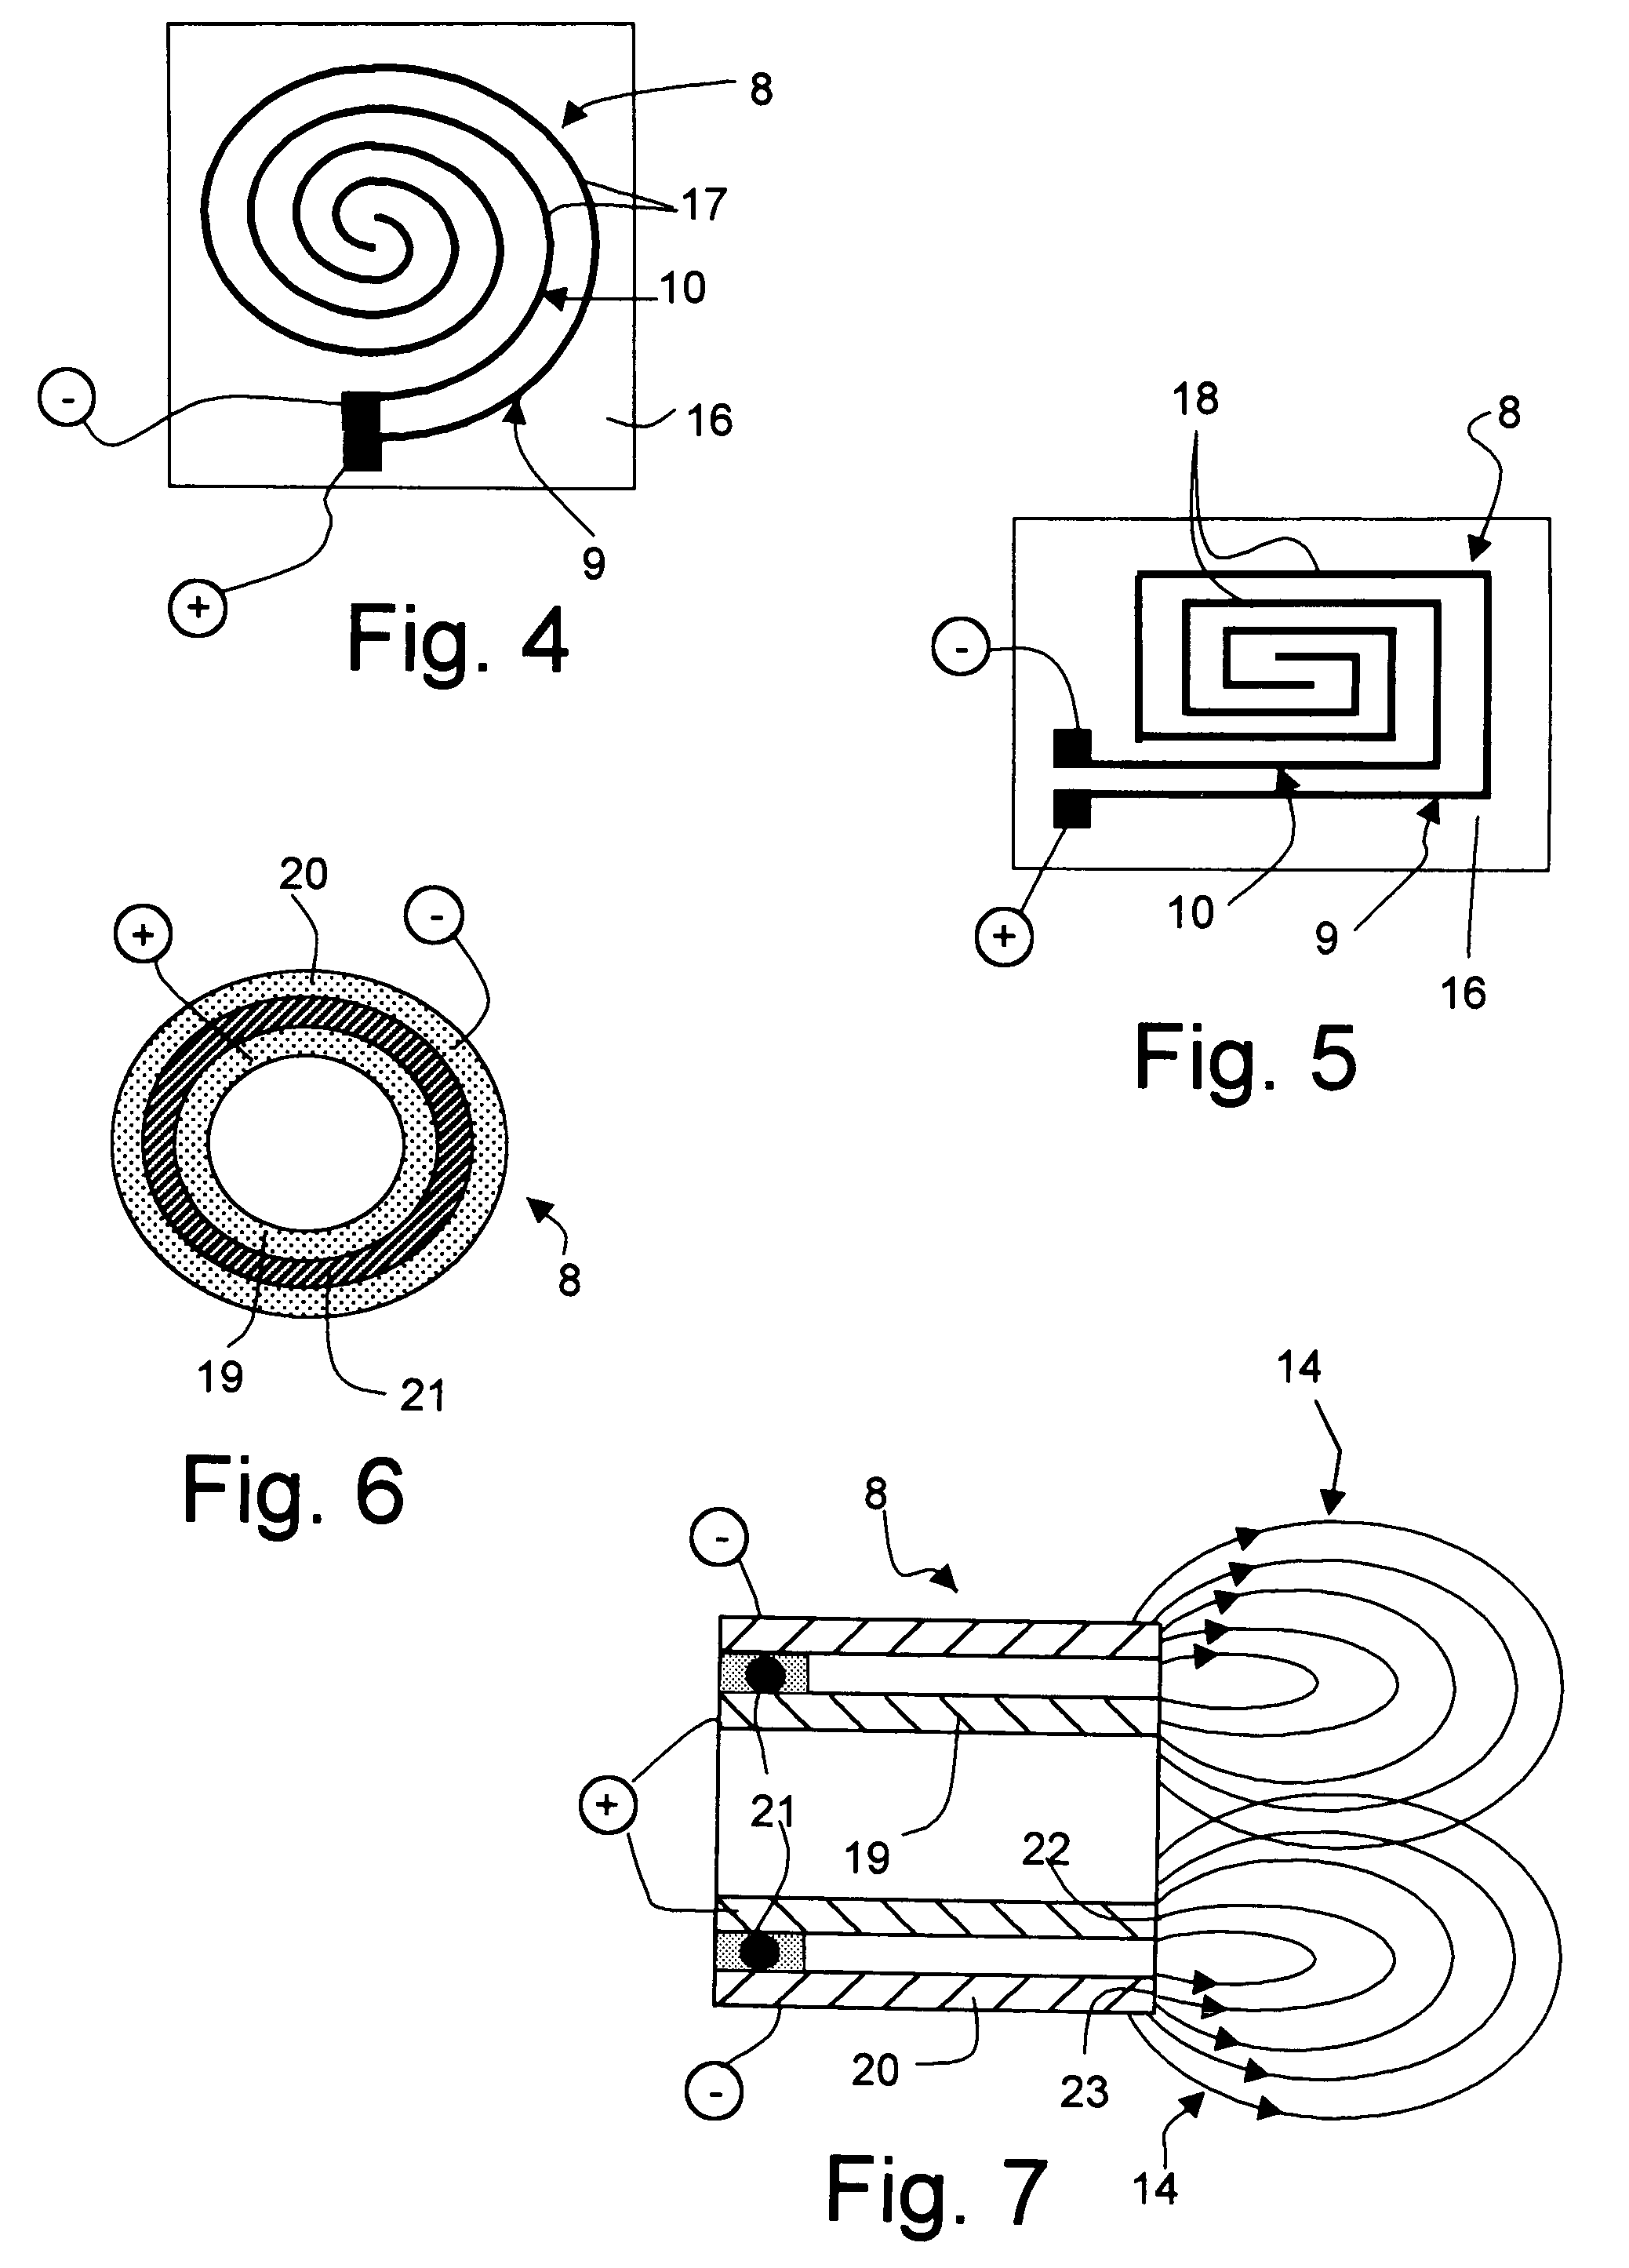 Method and system for evaluating local compactness of a granular material